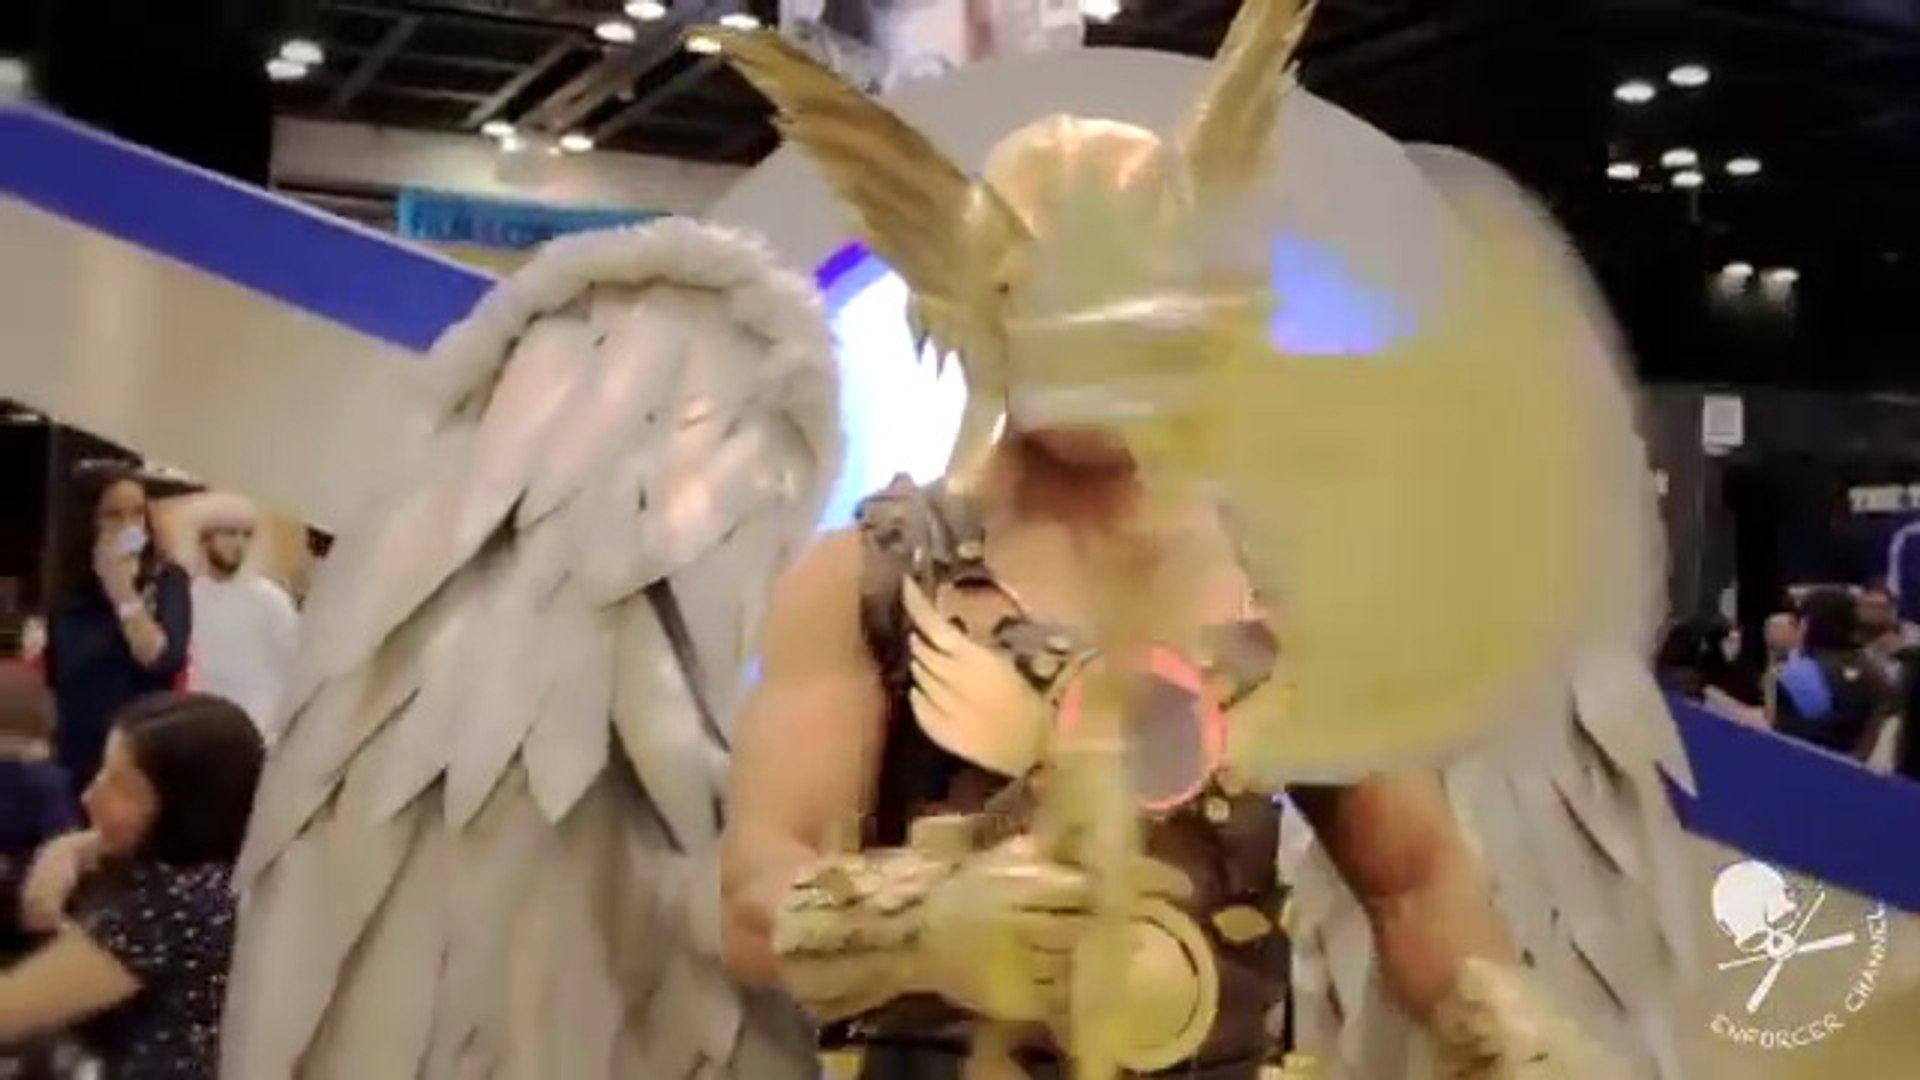 Cosplay  Music Videos - Middle East Film and Comic Con MEFCC 2014 - Cosplay Music video